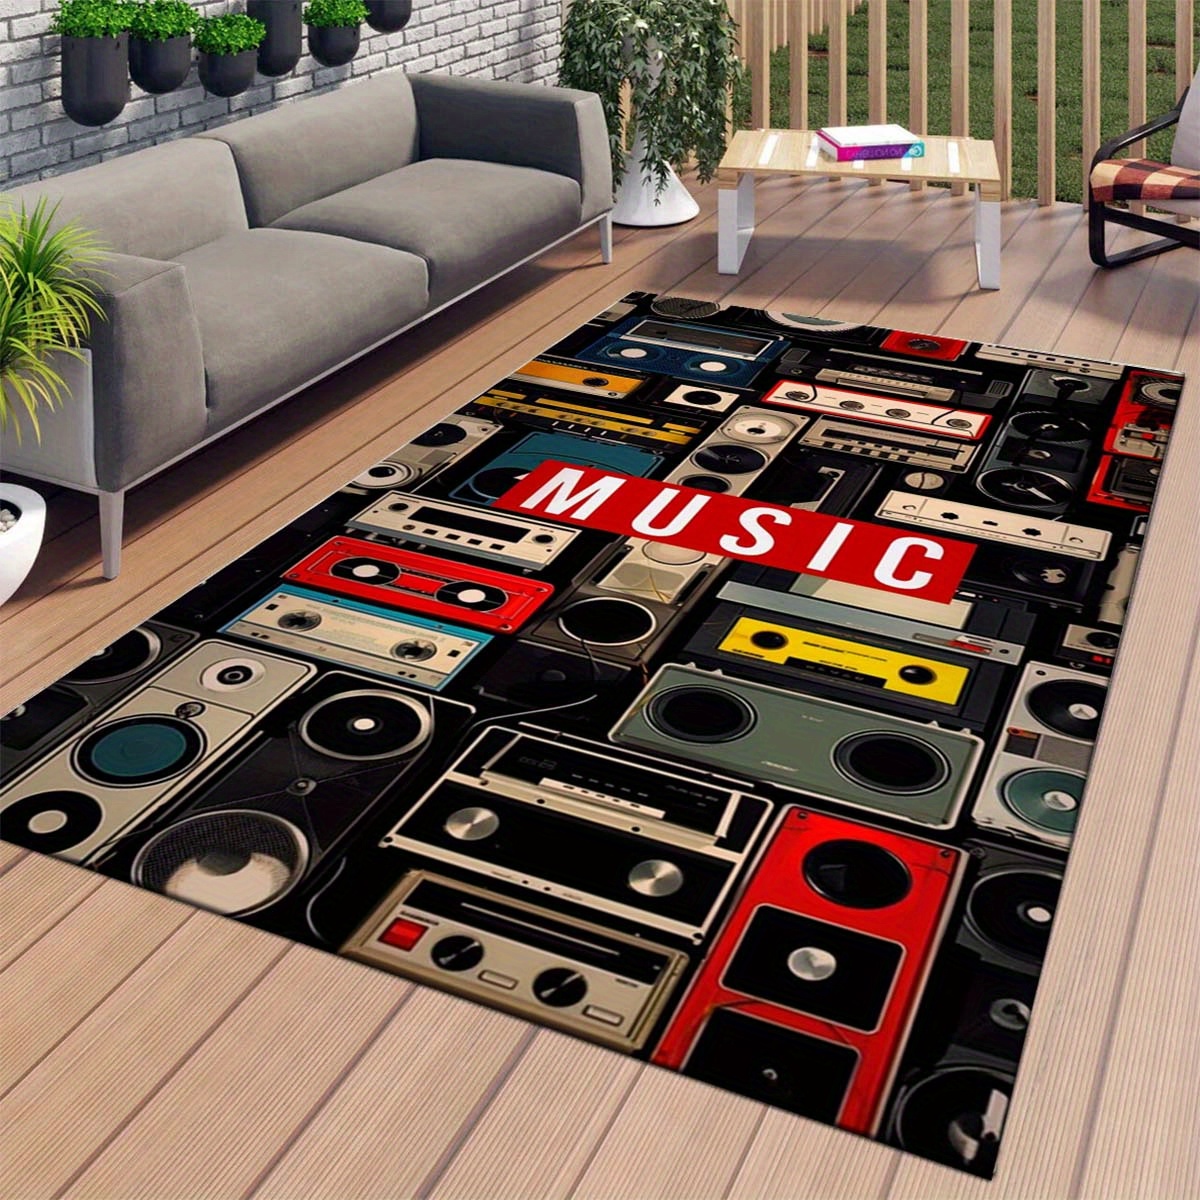 

1pc Music And Tape Printed Non-slip Resistant Rug, Outdoor Patio Garden Yard Decor Mat, Living Room Bedroom Corridor Mat Bed Area Rug, Modern Kitchen Home Decor, Room Decor